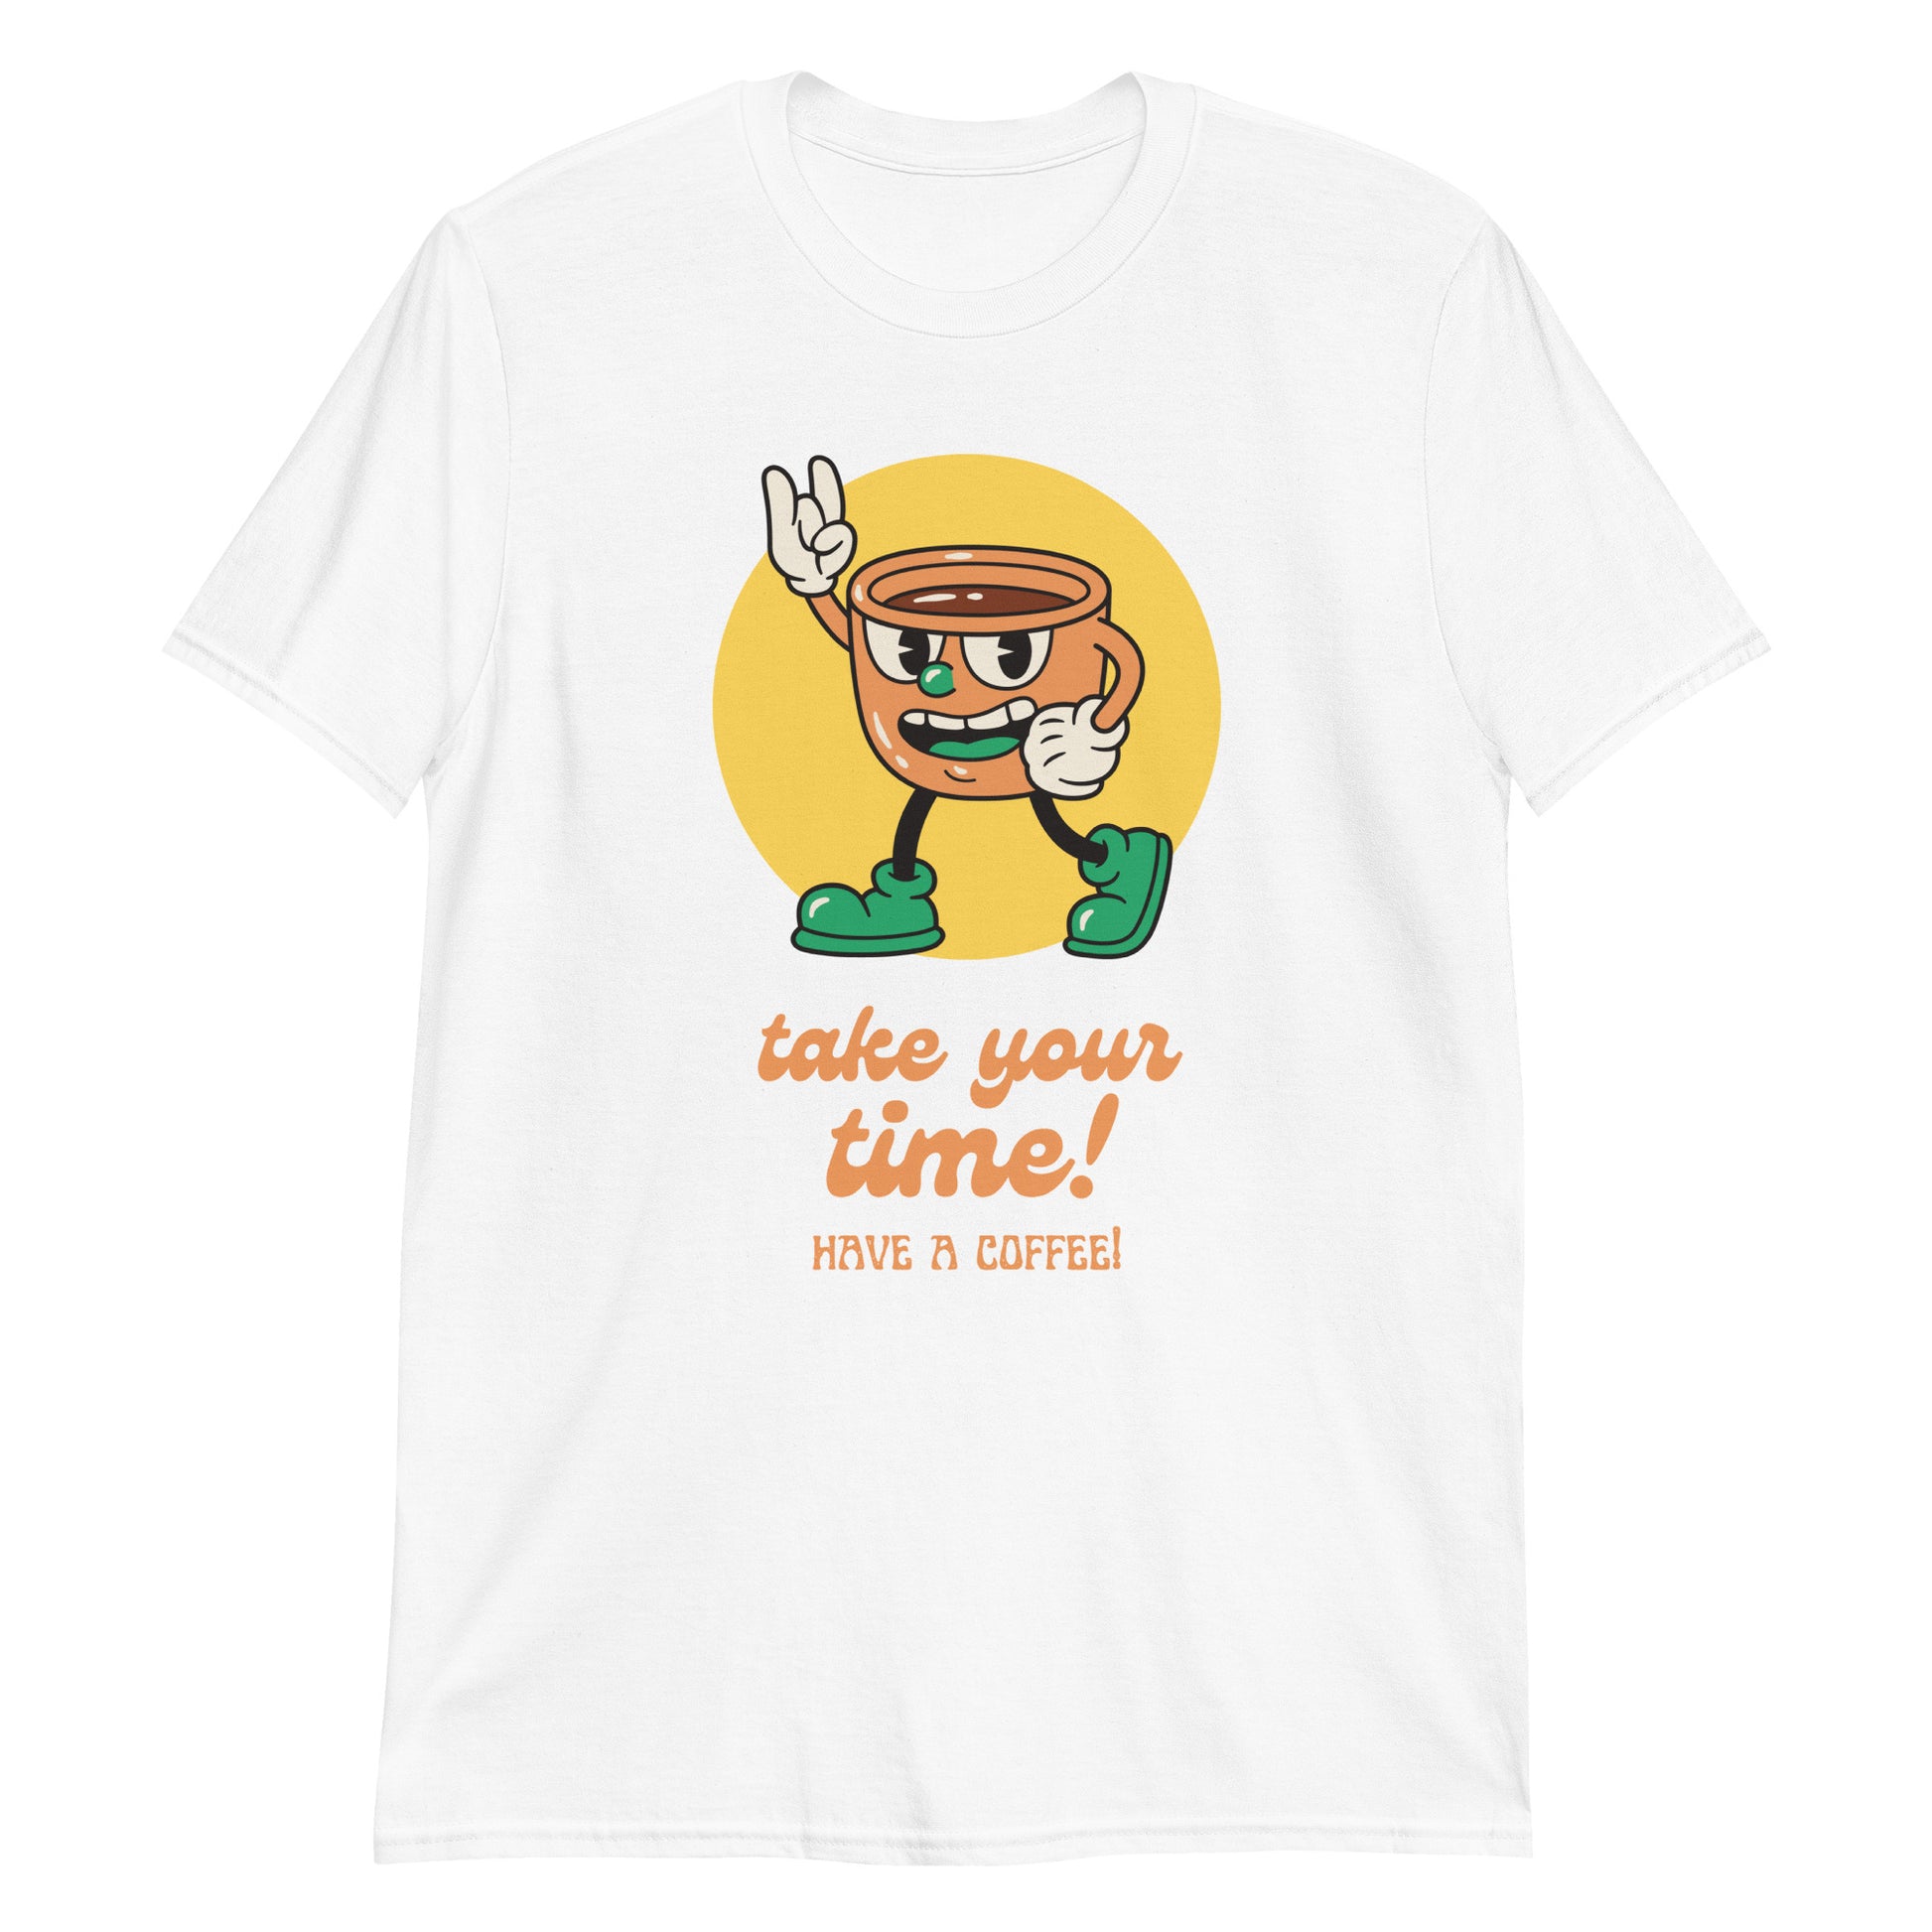 Take Your Time, Have A Coffee - Short-Sleeve Unisex T-Shirt White Unisex T-shirt Coffee Retro